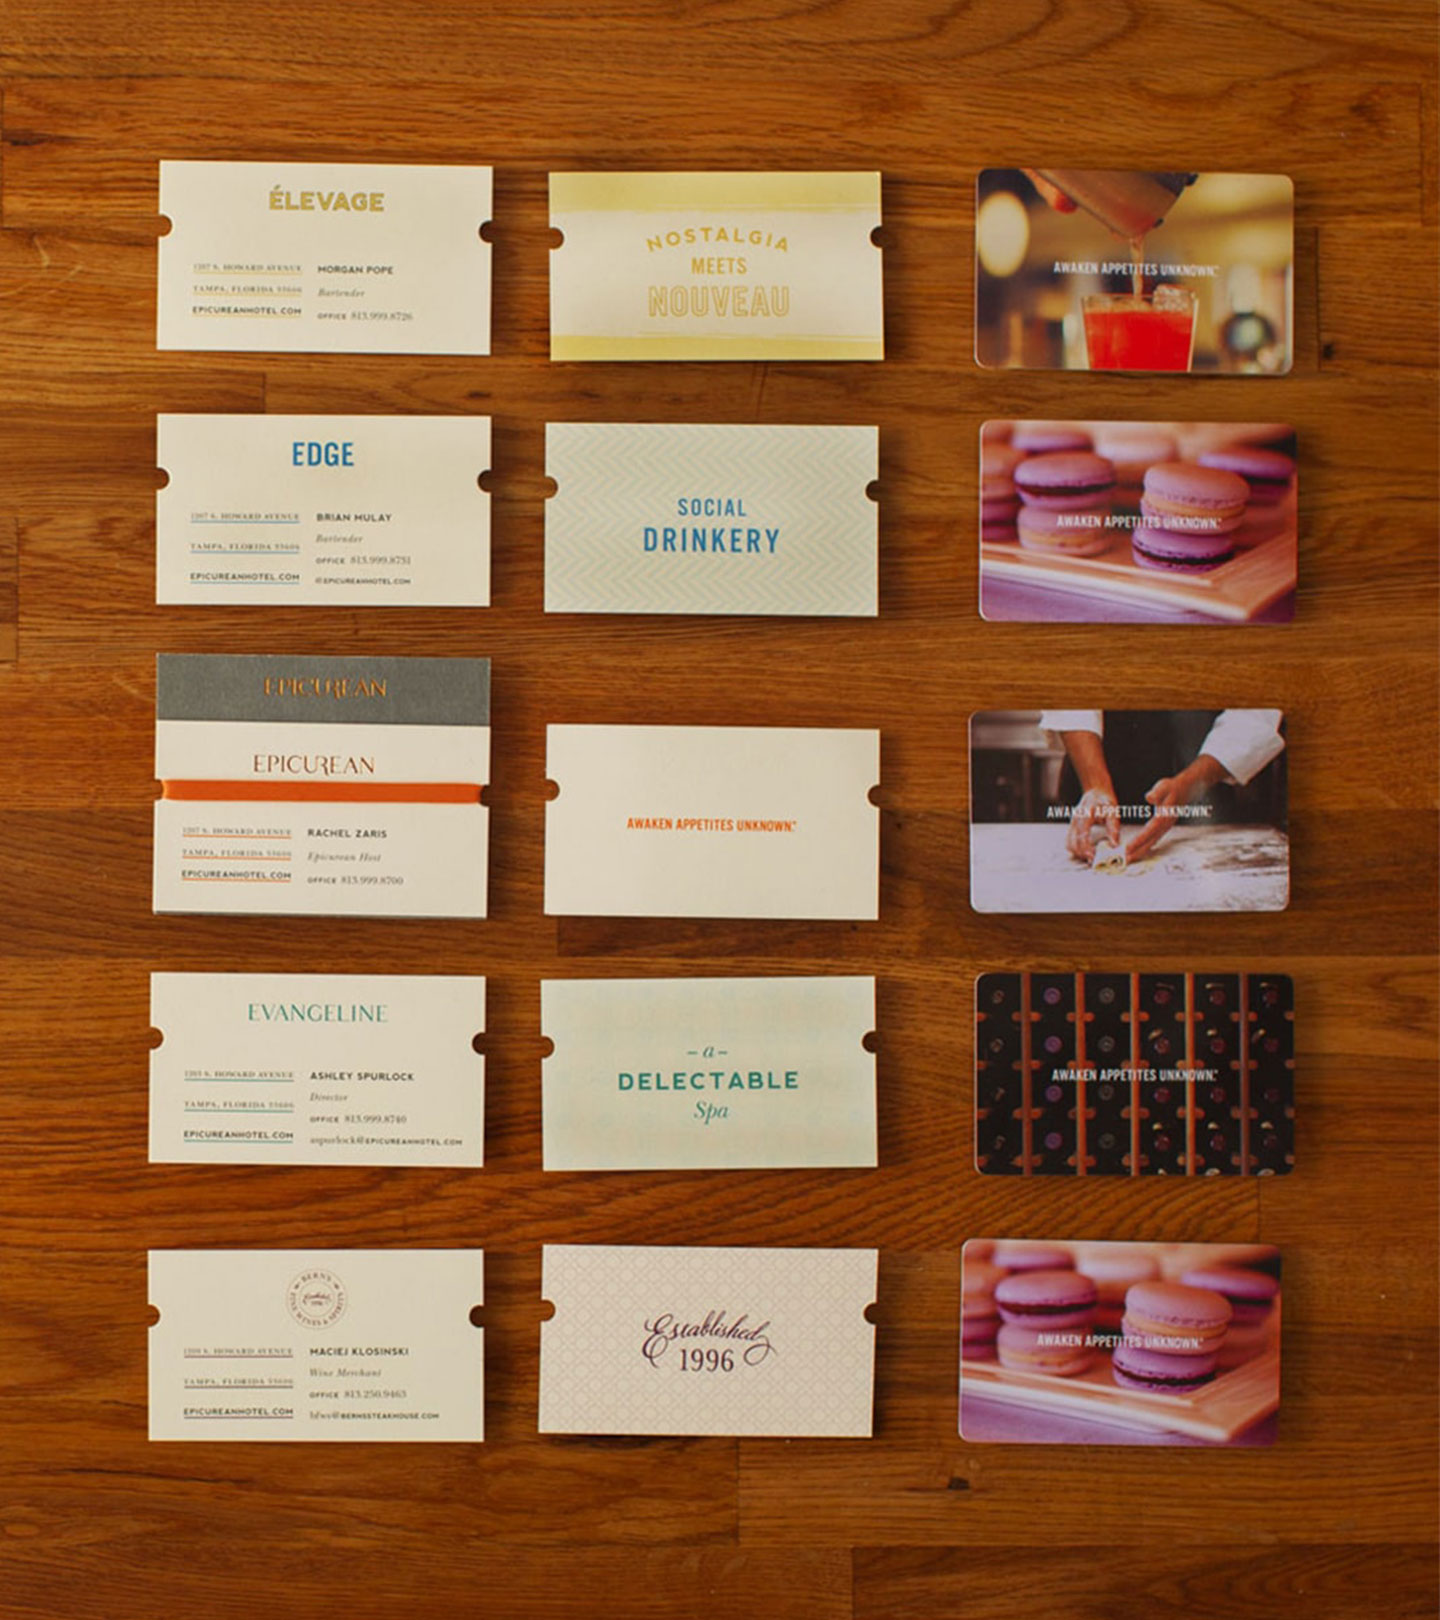 Epicurean Hotel branded collateral and business cards